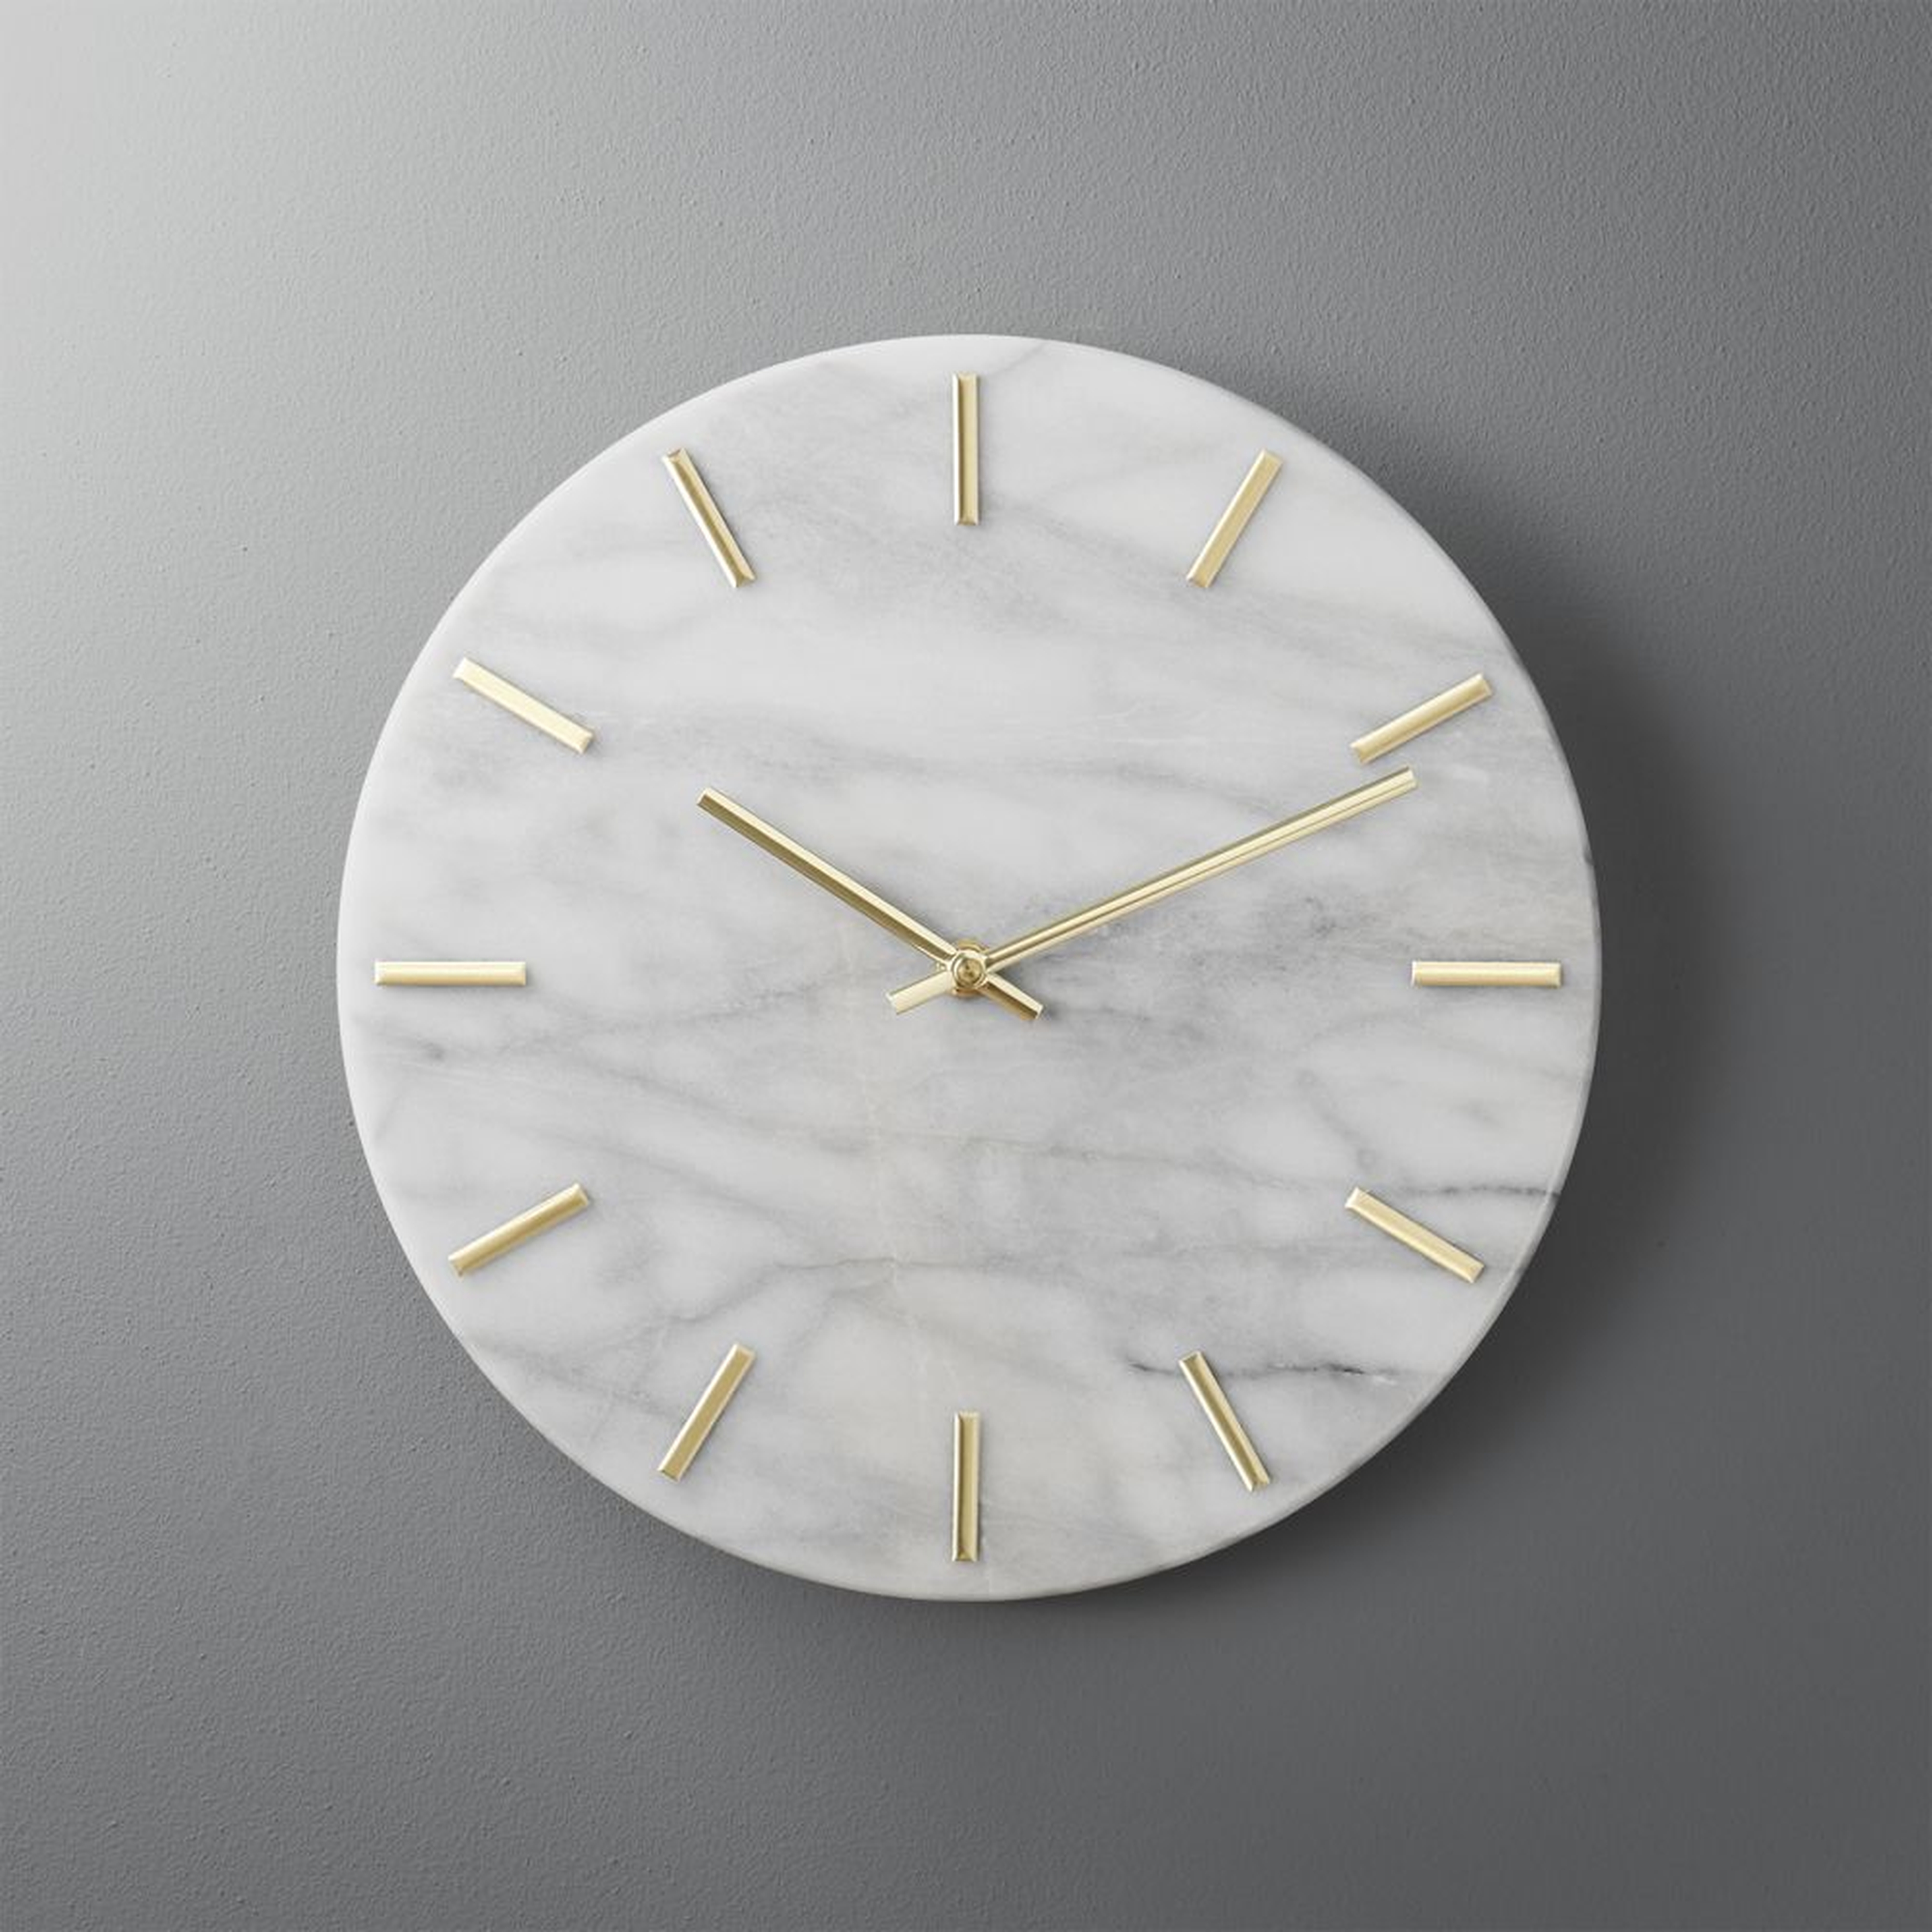 Carlo marble and brass wall clock - CB2